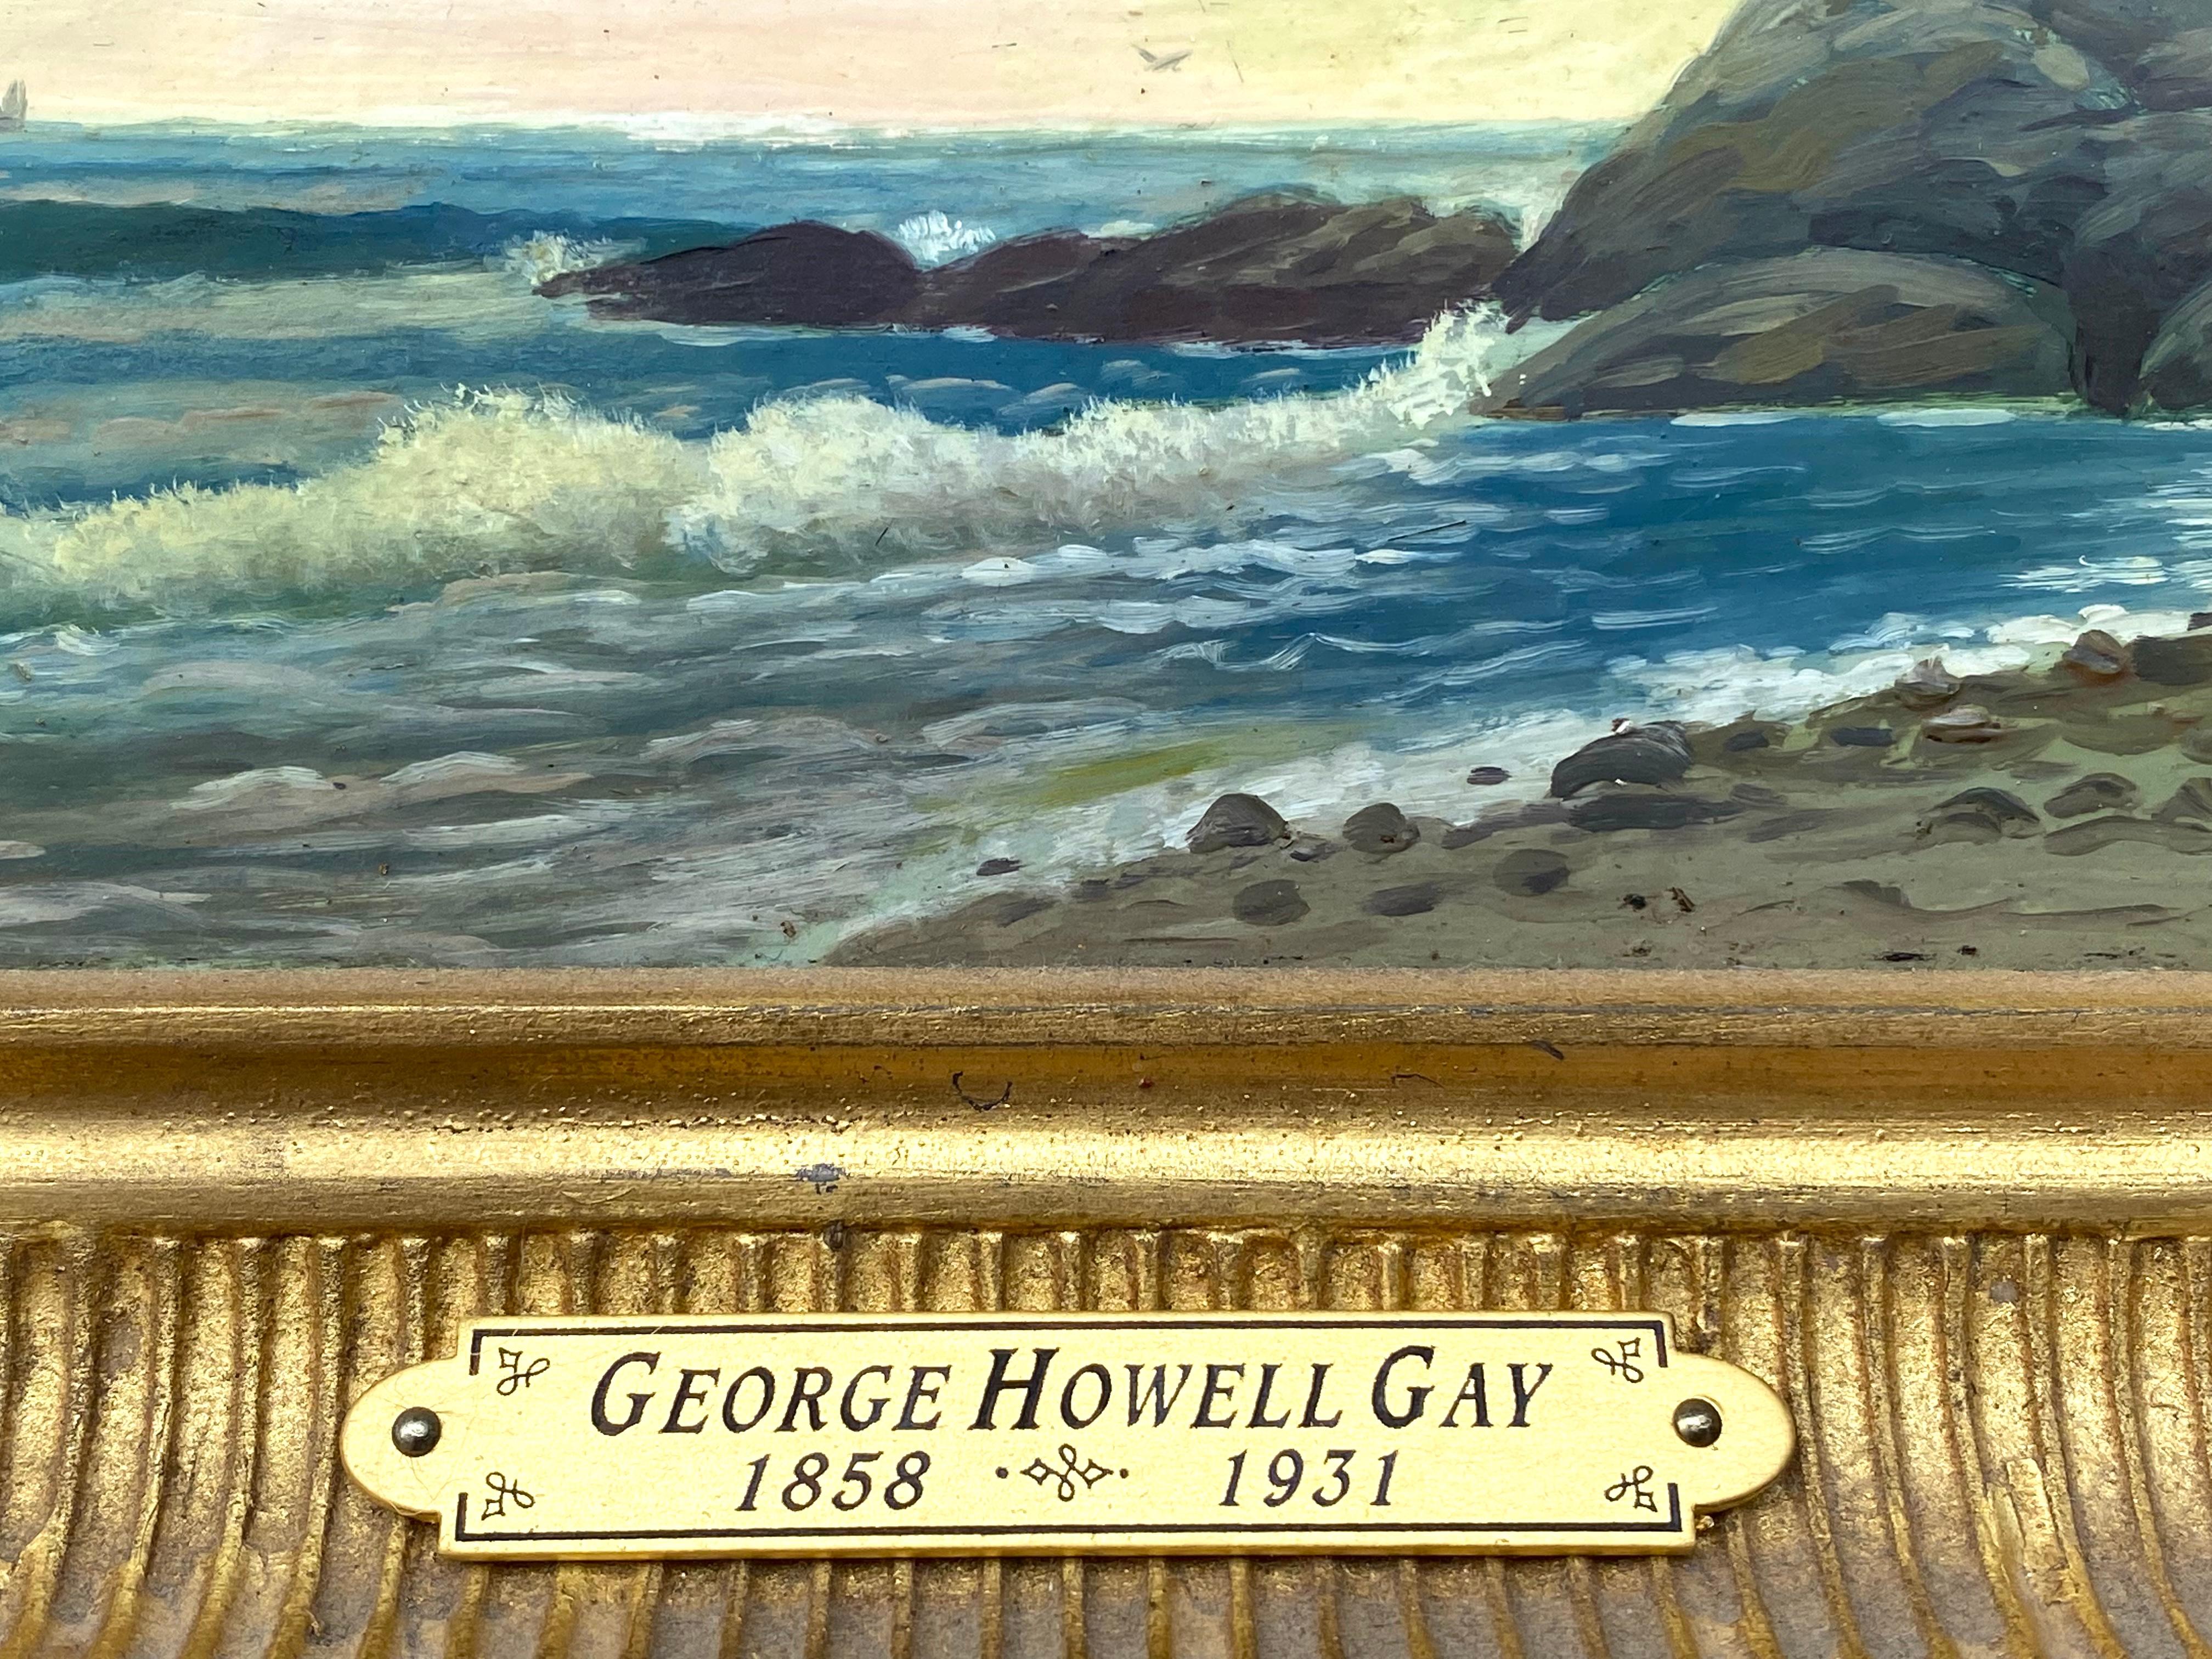 Circa 1895 original oil on board painting by the well known American marine artist, George Howell Gay.  Signed lower right. In very good condition. Framed in a semi antique gold leaf Hudson River cove frame that is not original to the painting.